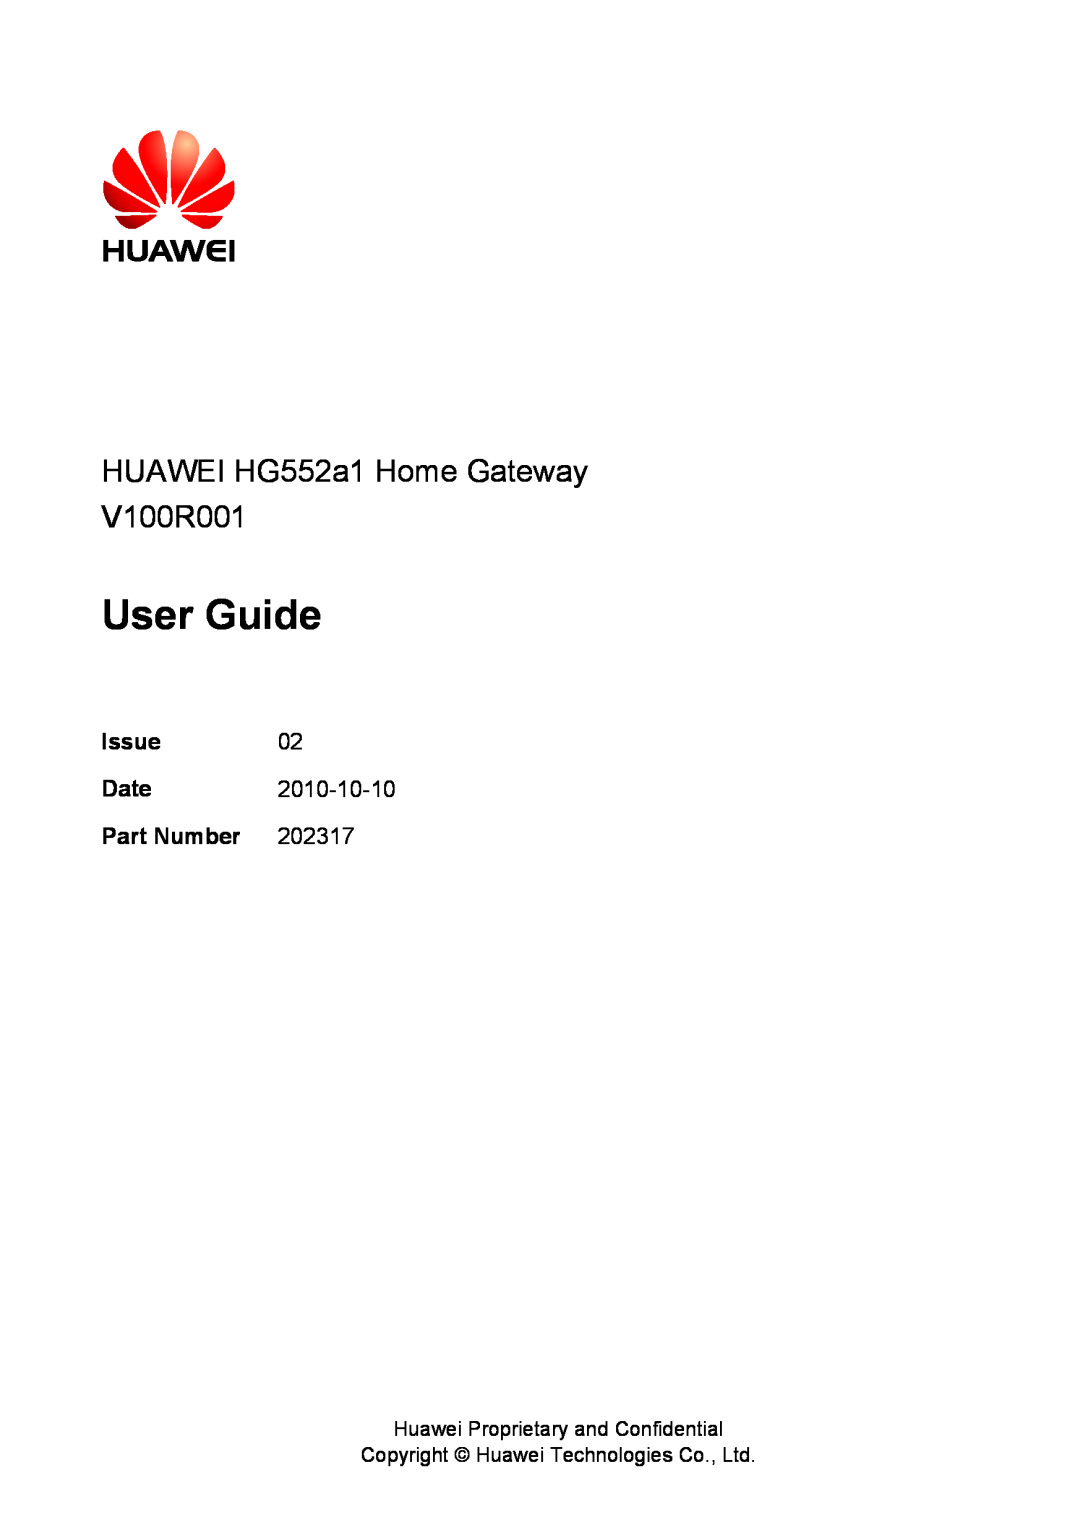 Huawei HUAWEI HG552a1 Home Gateway V100R001, User Guide, Issue, Date, Part Number, Huawei Proprietary and Confidential 